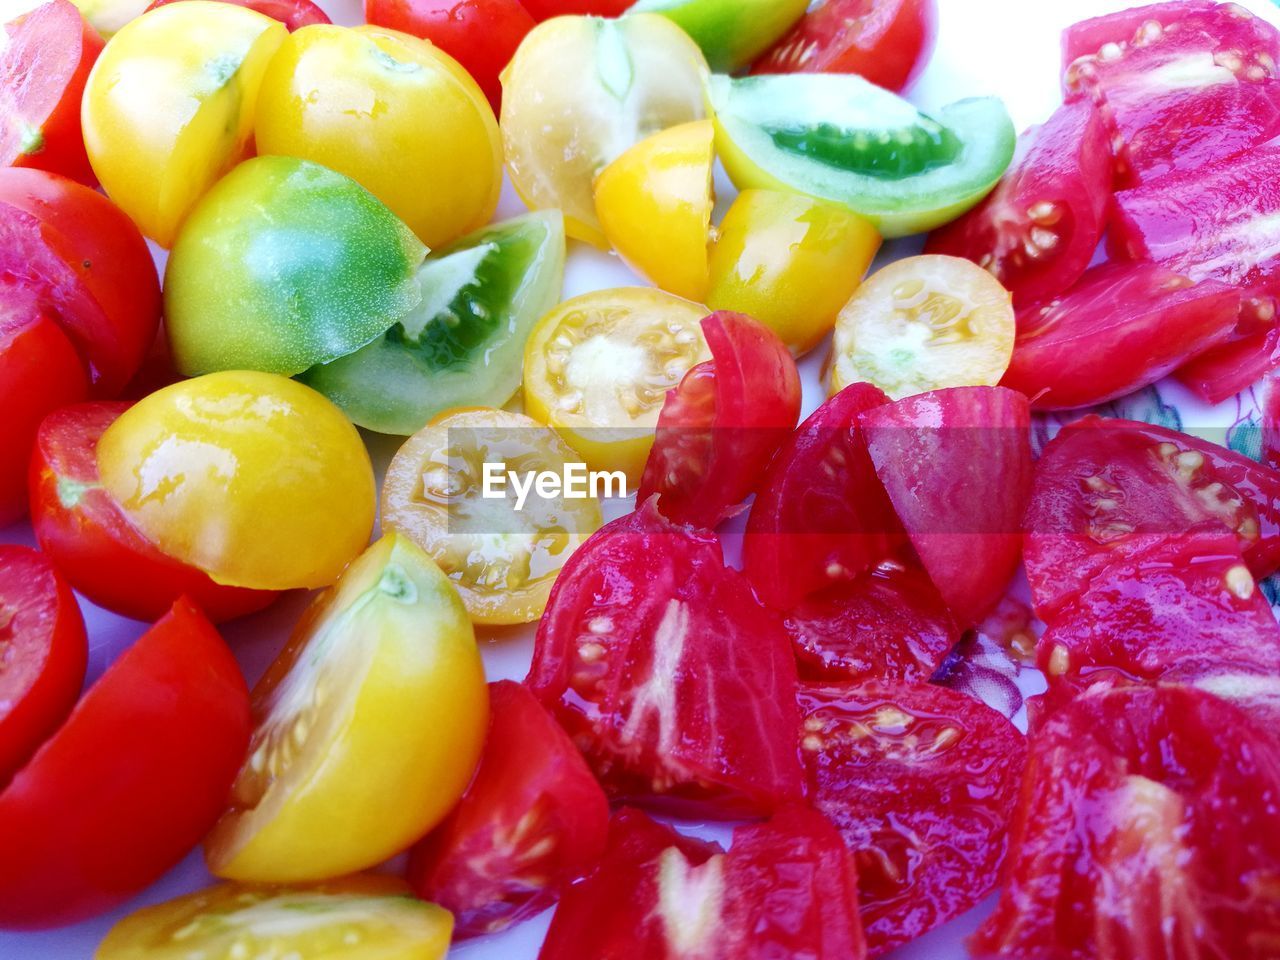 FULL FRAME SHOT OF CHOPPED FRUITS AND VEGETABLES